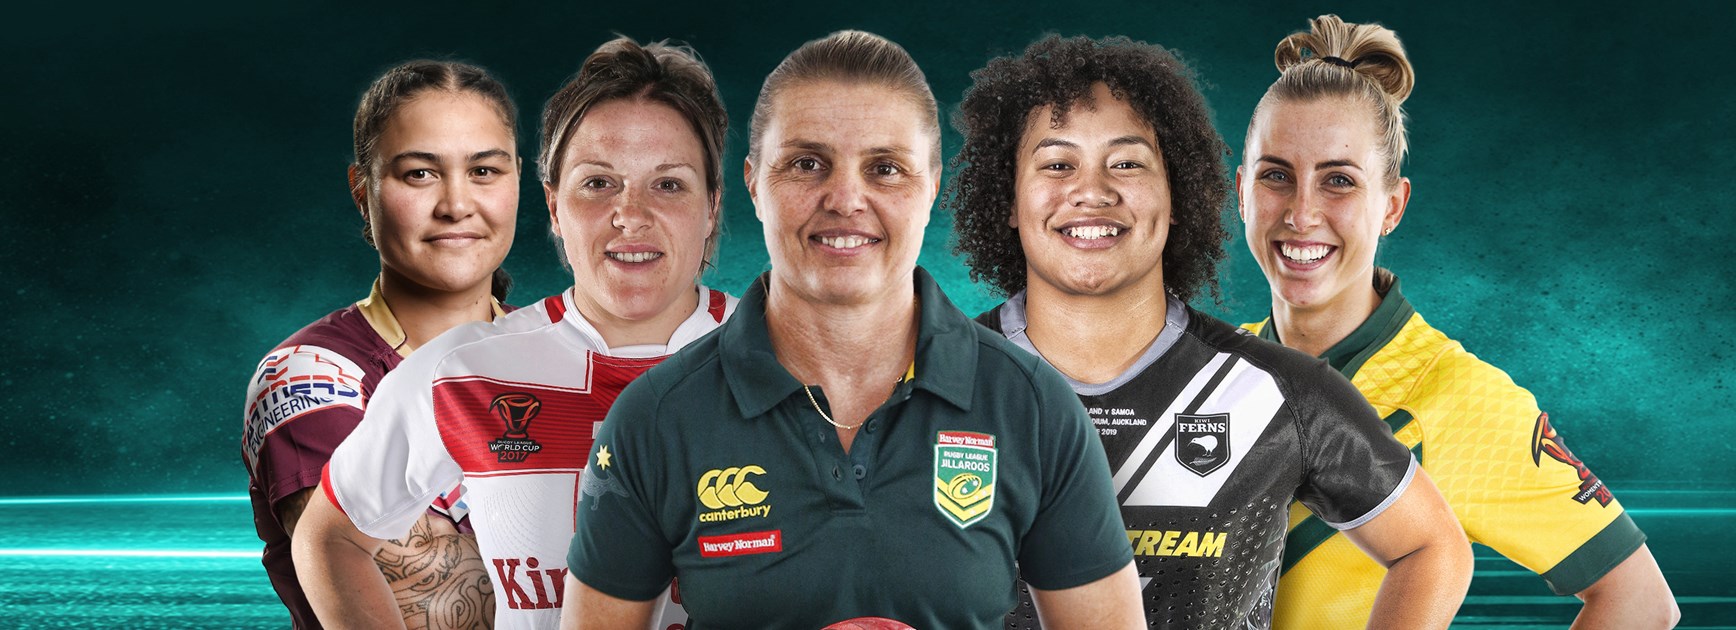 Mix of old and new in women's Team of the Decade